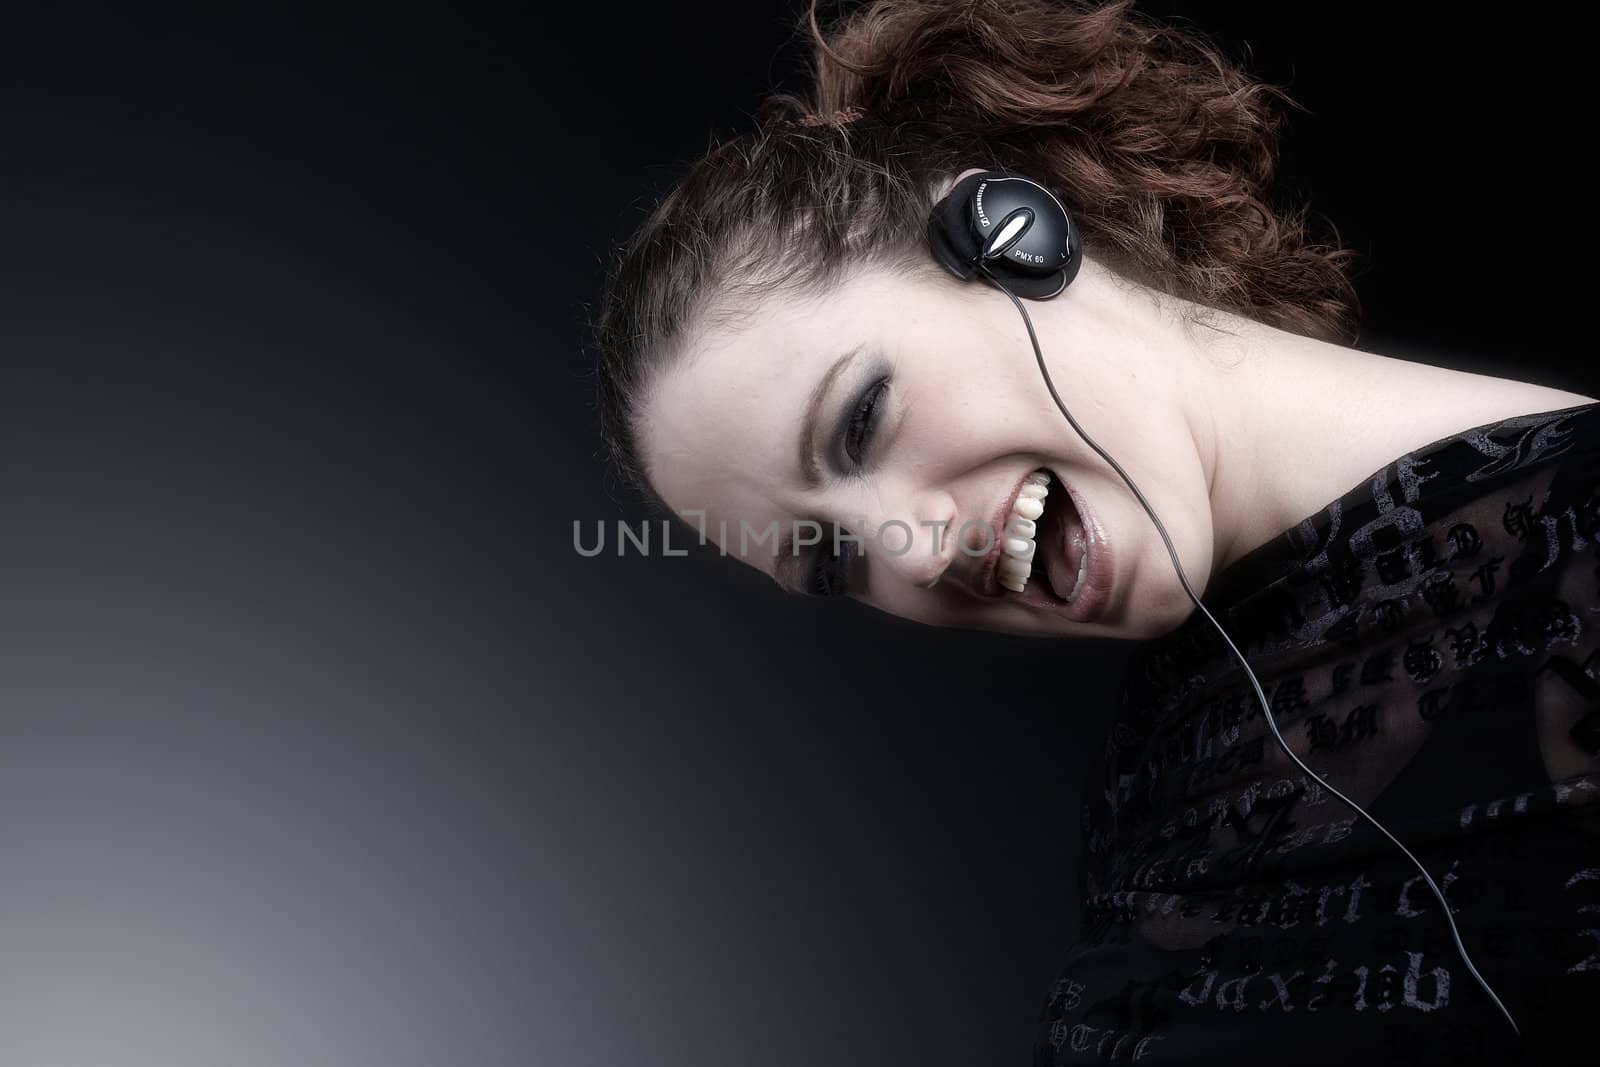 Portrait of a woman with long curly hair and headphones